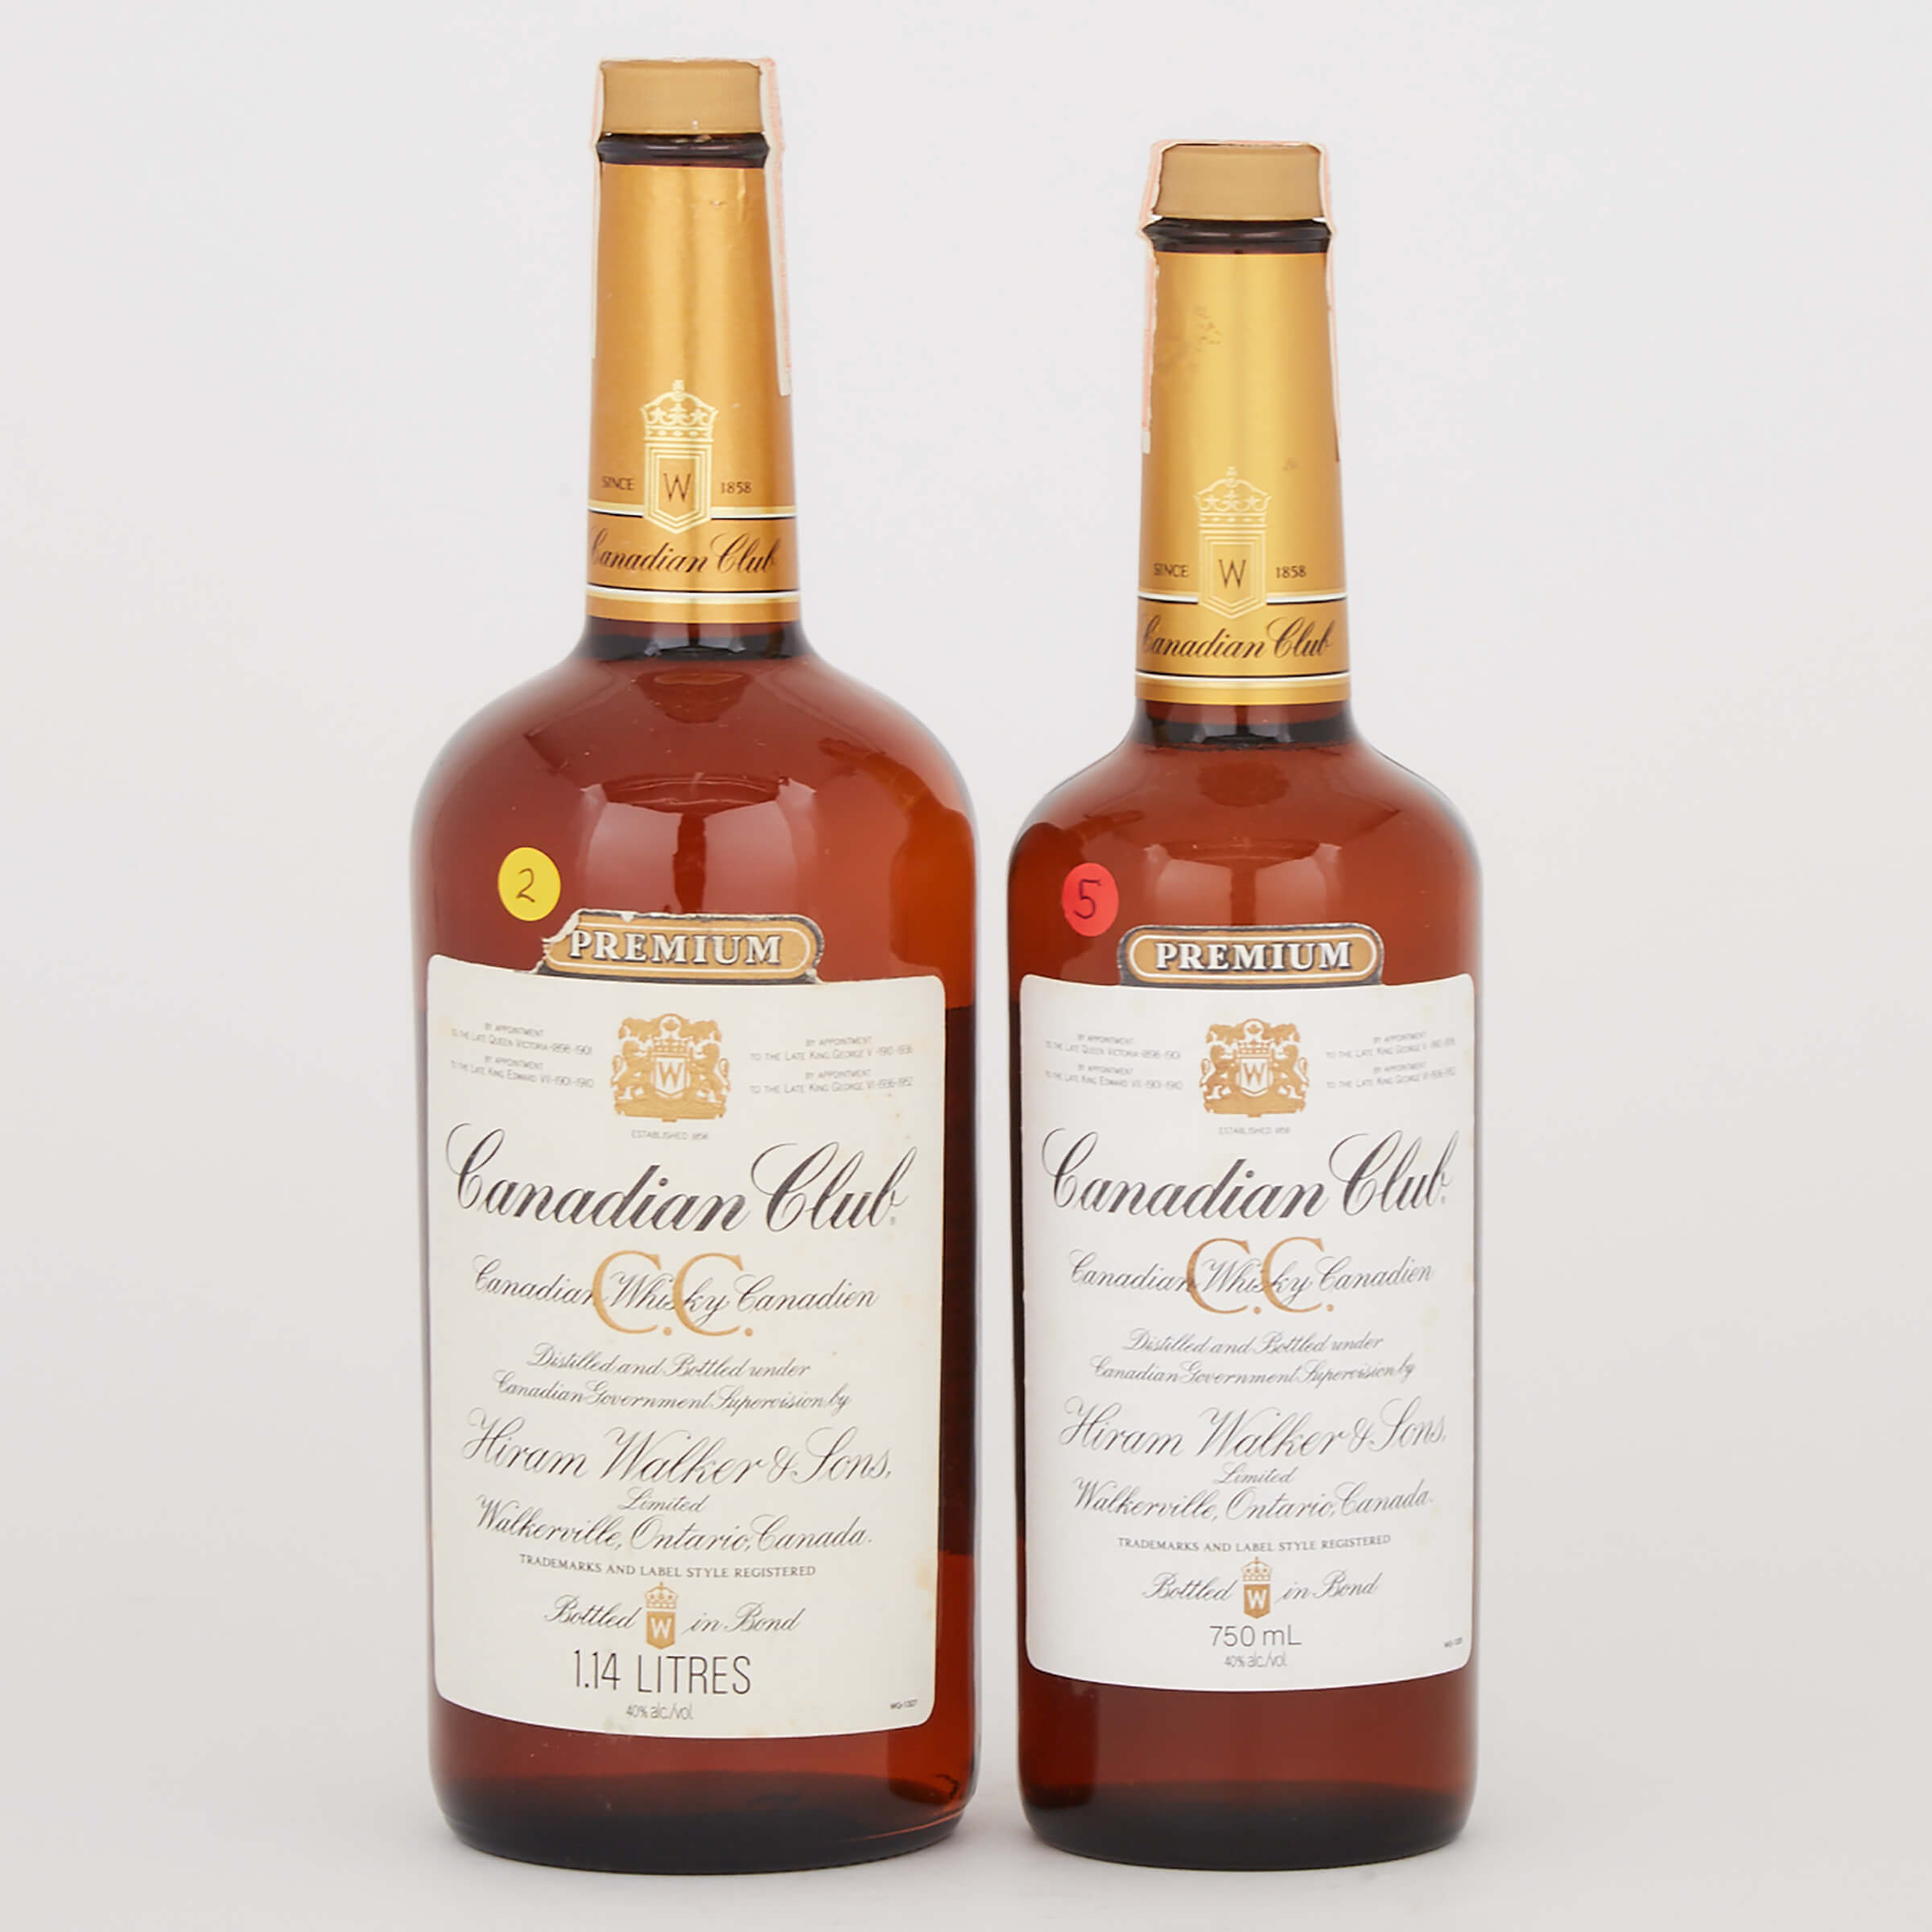 CANADIAN CLUB PREMIUM CANADIAN WHISKY (ONE 750 ML)
CANADIAN CLUB PREMIUM CANADIAN WHISKY (ONE 1140 ML)